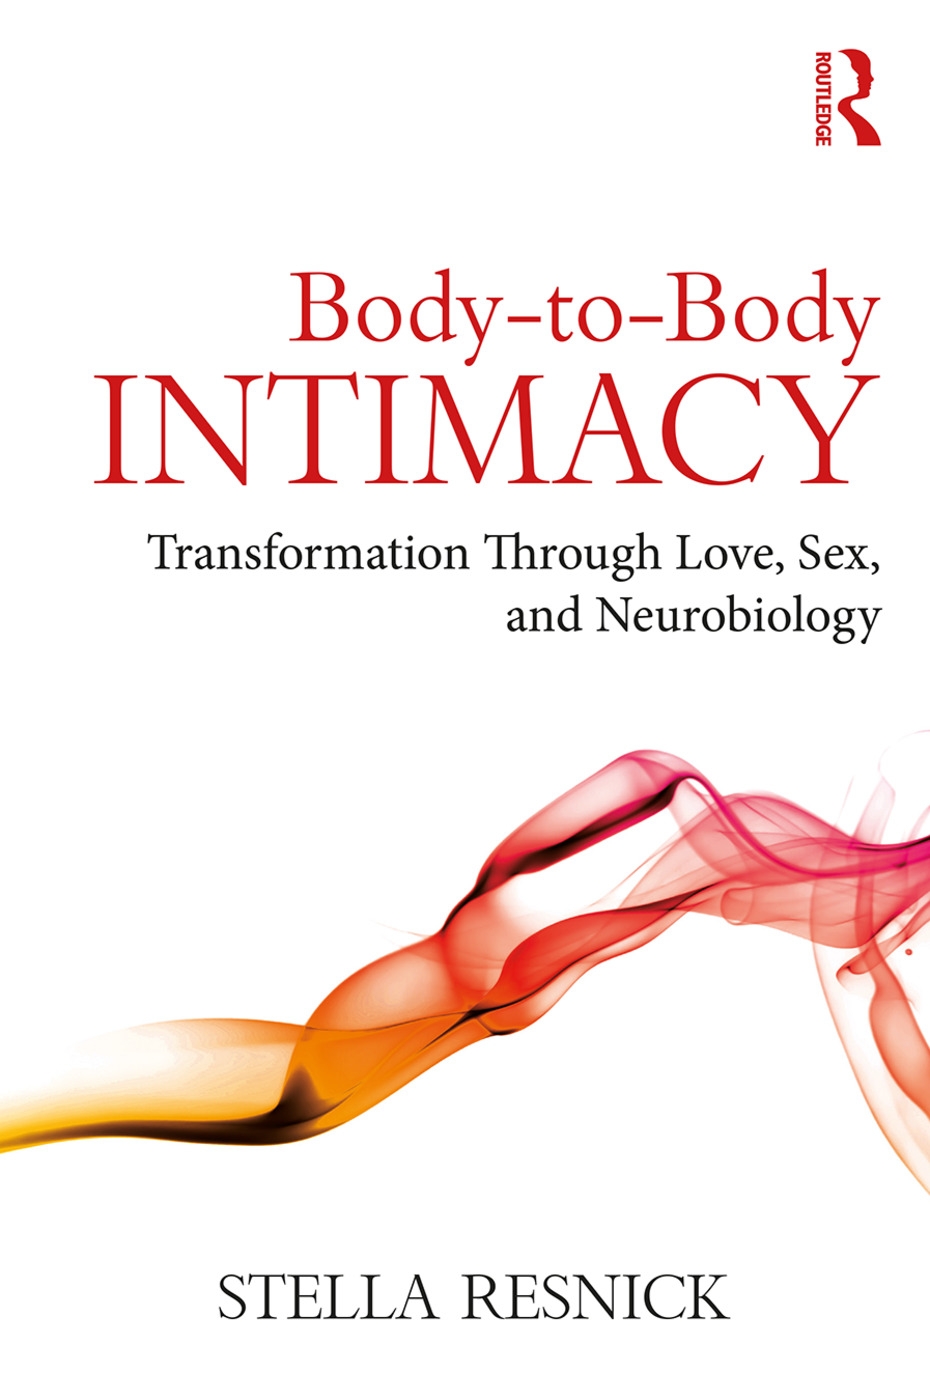 Body-To-Body Intimacy: Transformation Through Love, Sex, and Neurobiology